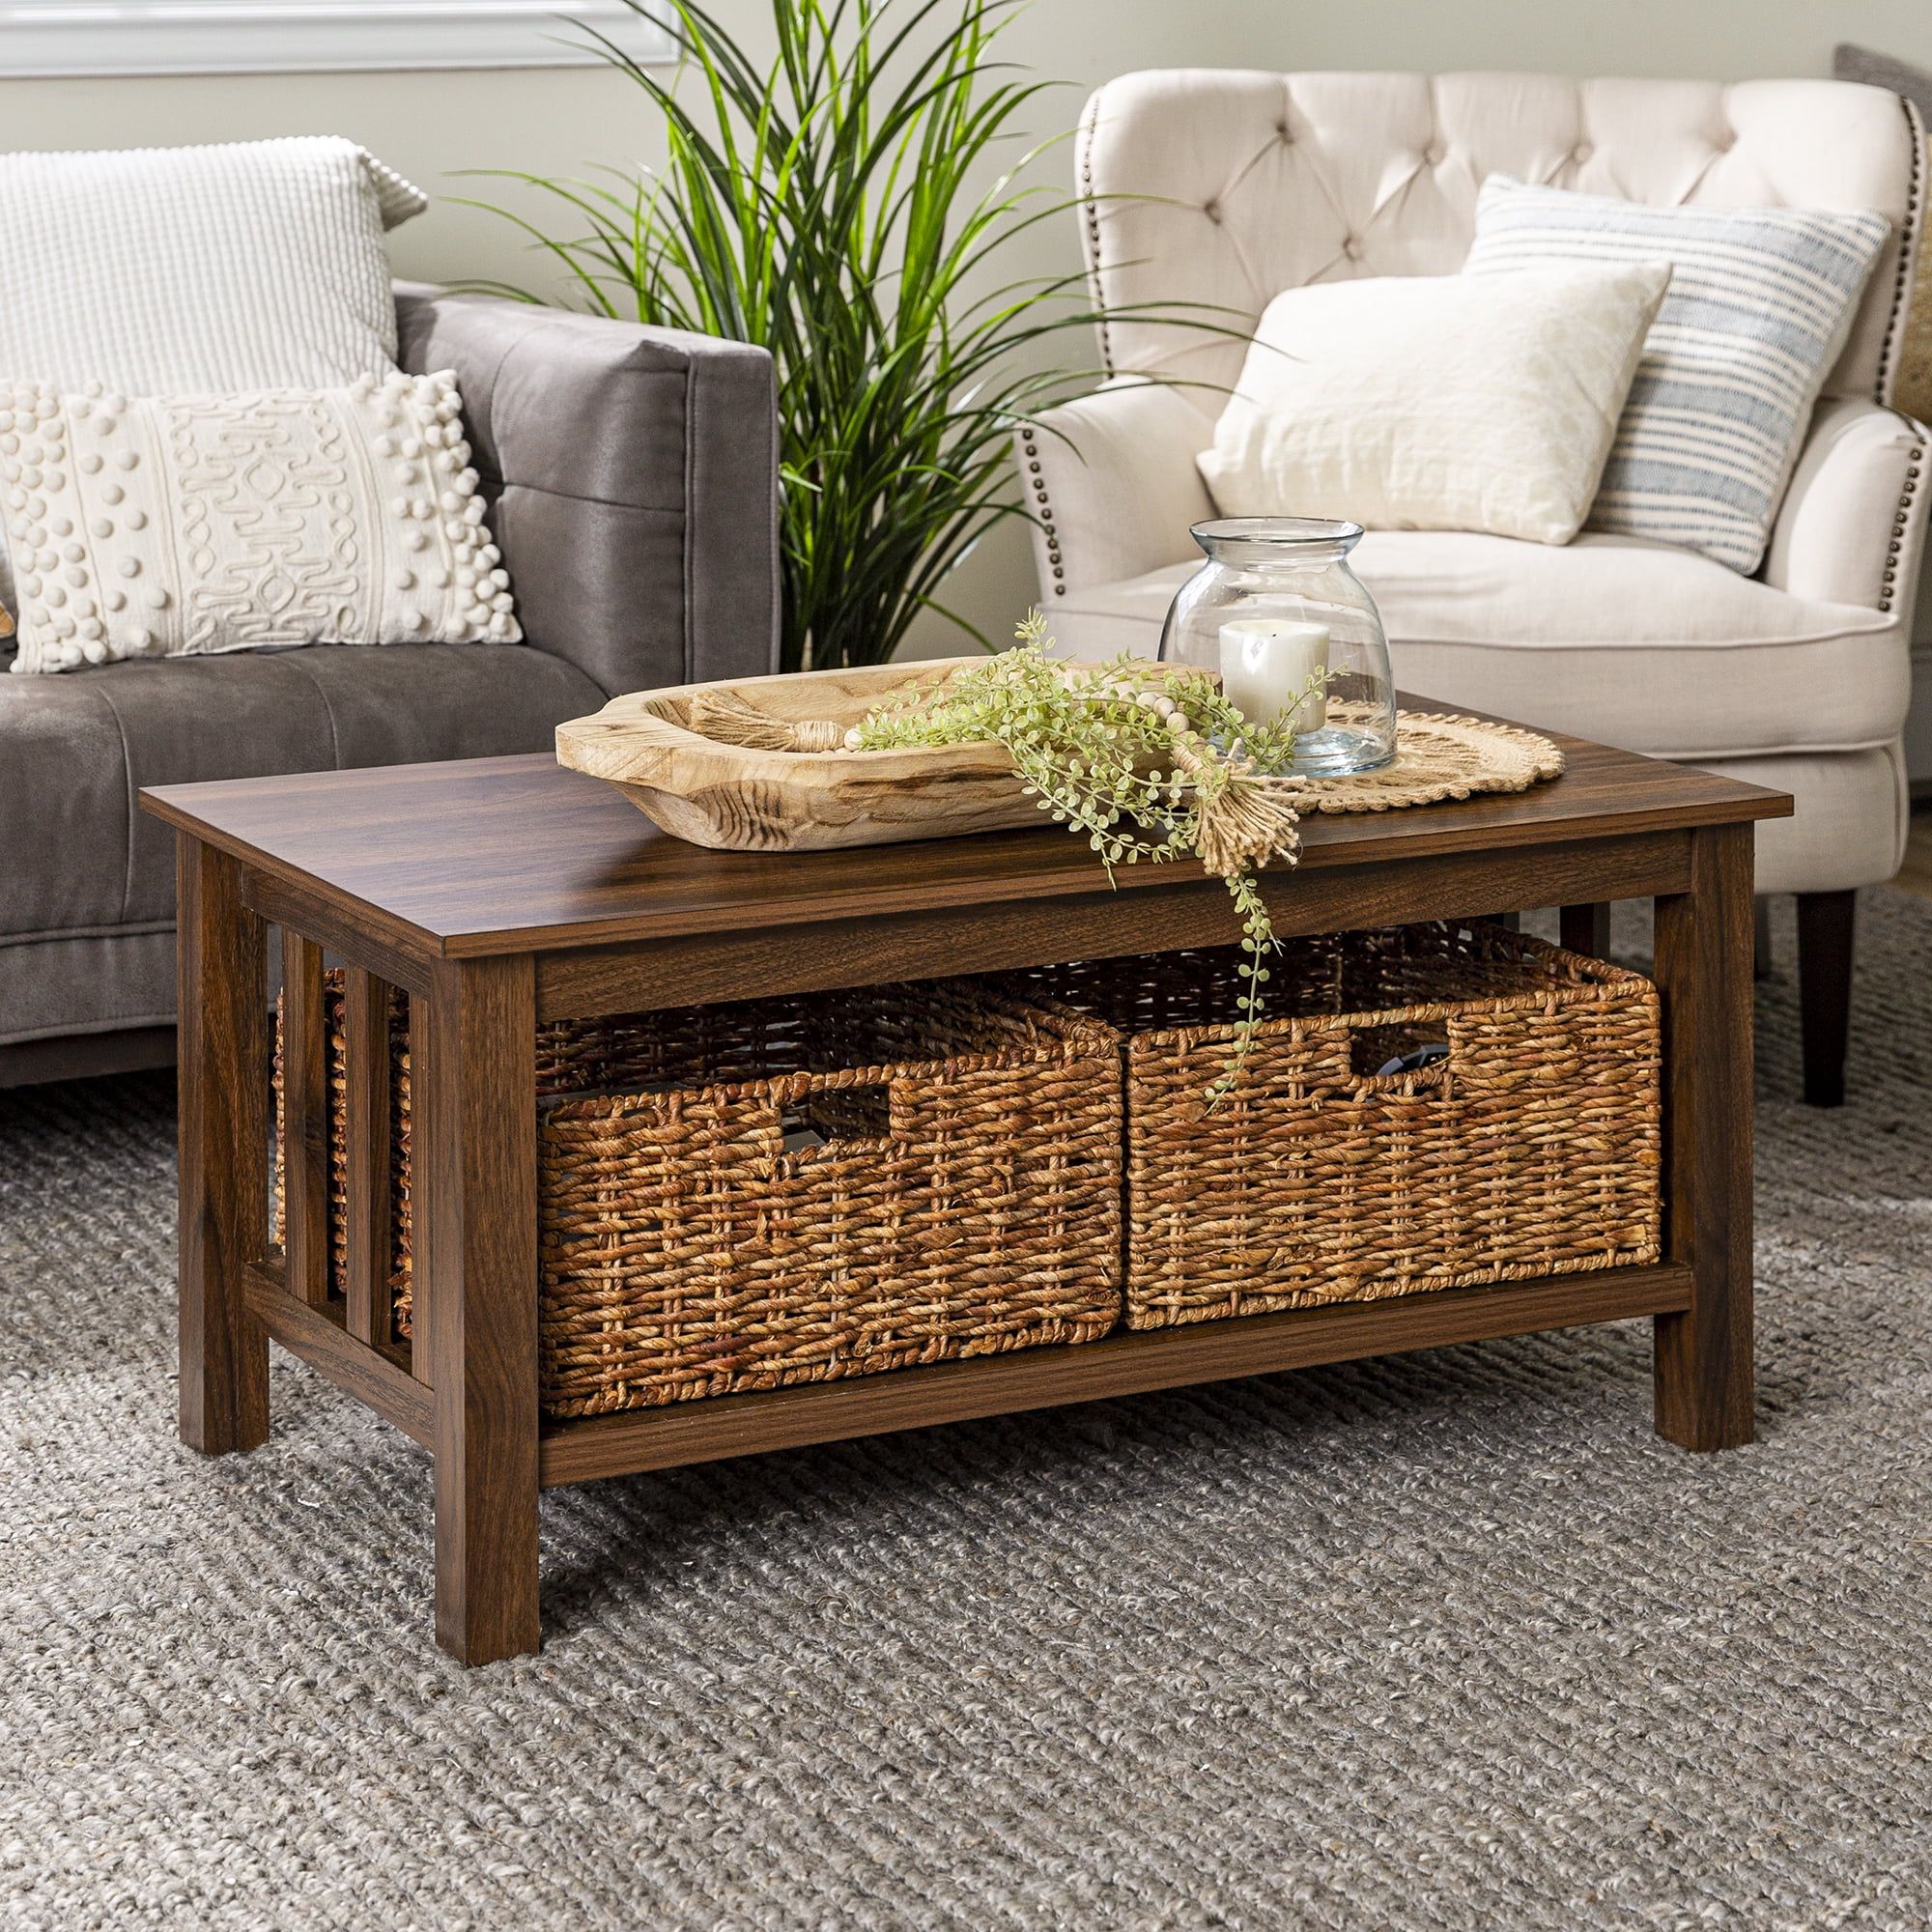 Woven Paths Traditional Storage Coffee Table With Bins, Dark Walnut In Woven Paths Coffee Tables (Photo 2 of 15)